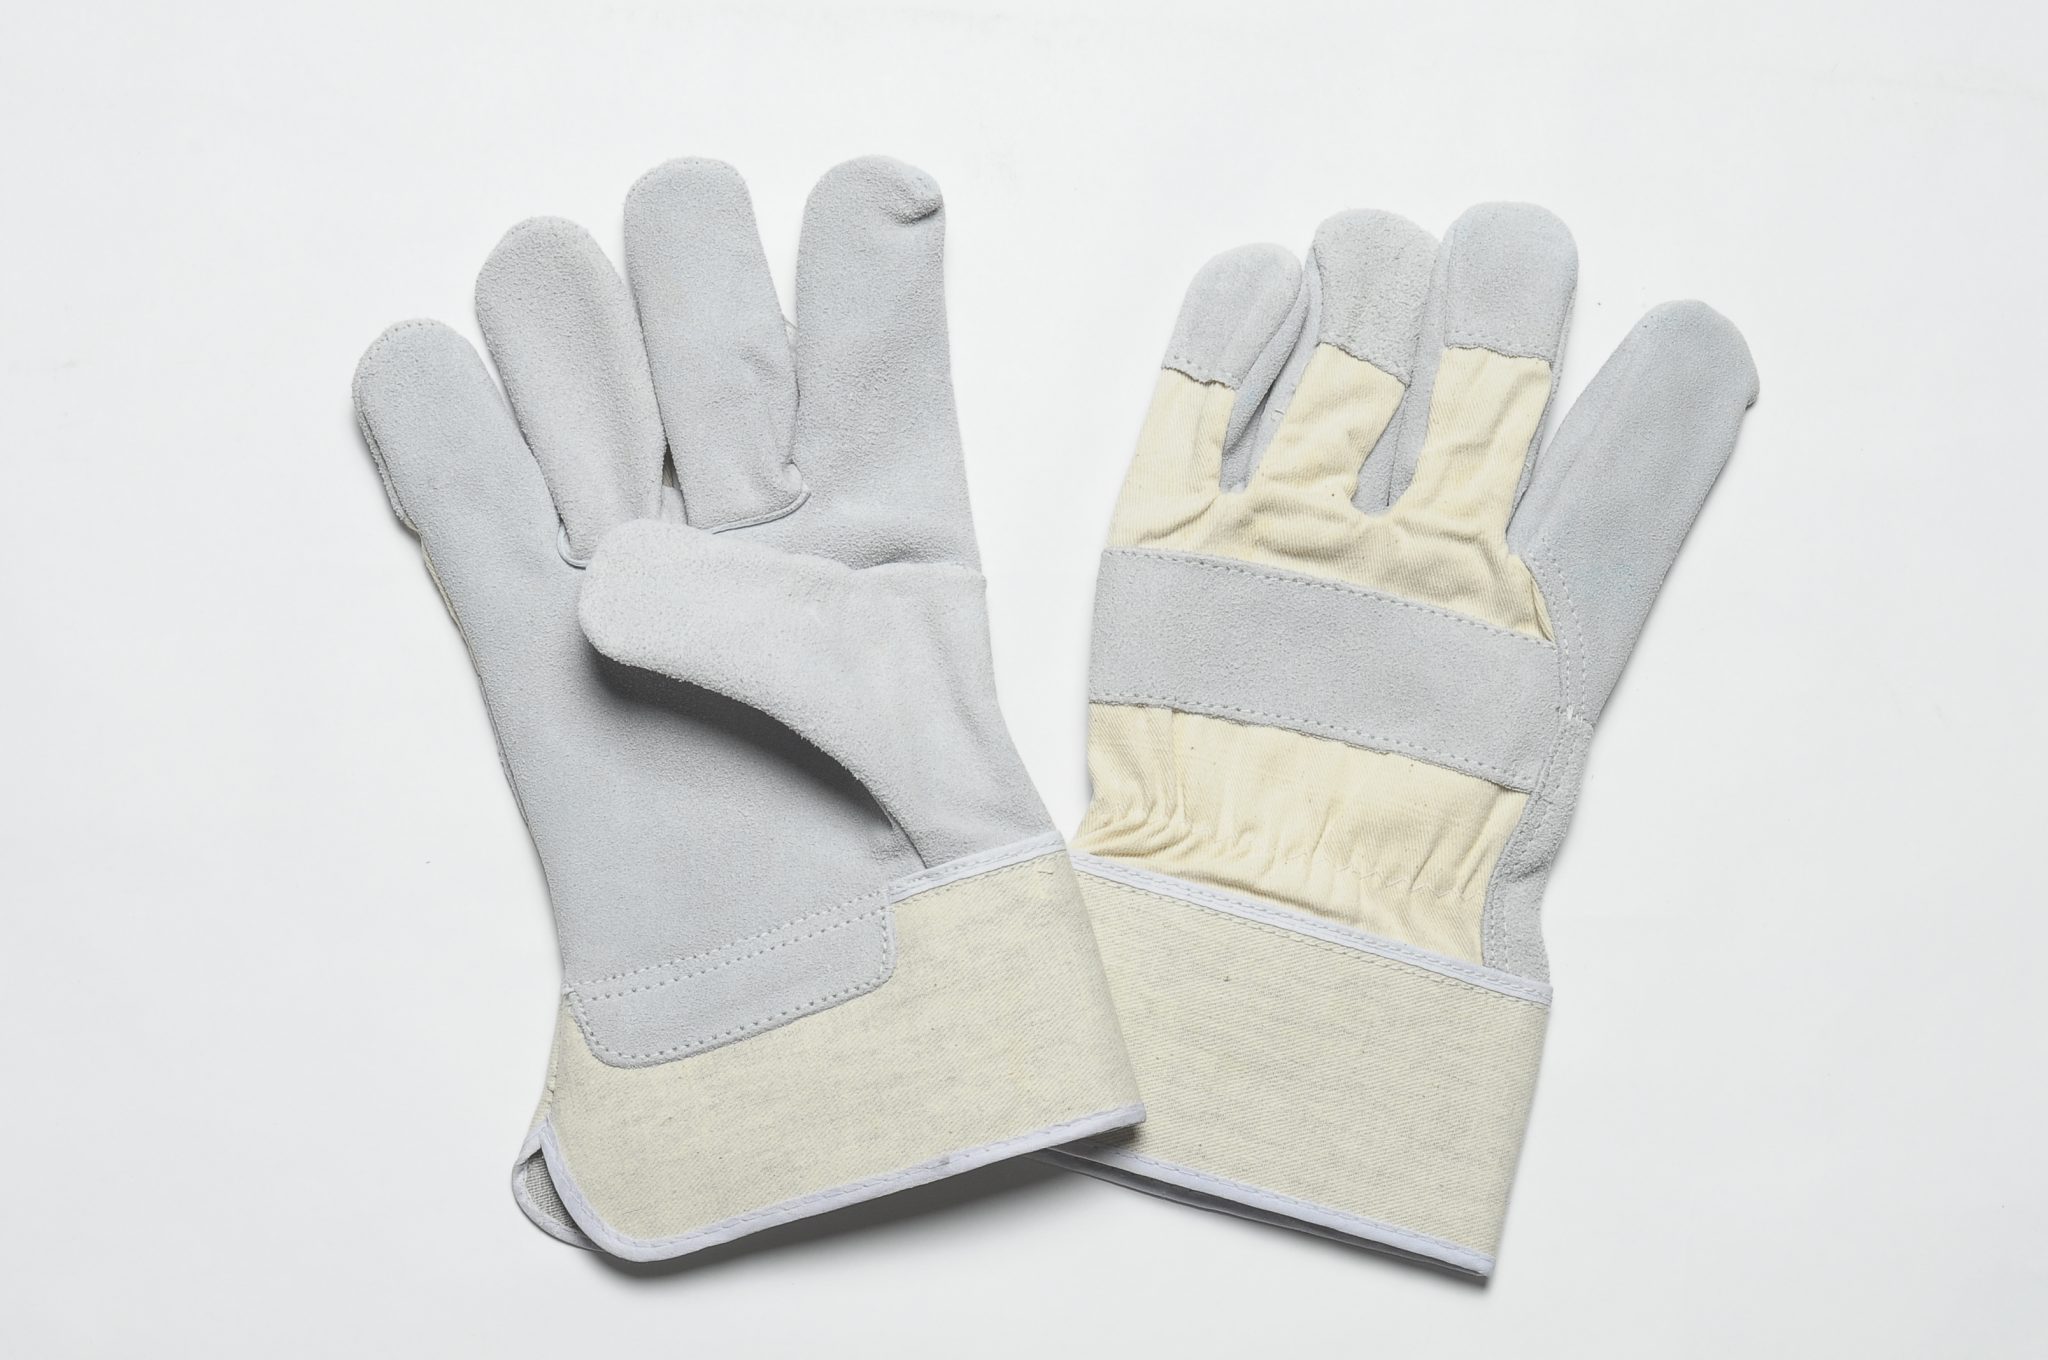 NATURAL SPLIT GLOVES. FLANNEL LINER IN THE PALM. WHITE CUFF & BACK, ADJUSTIBLE ELASTIC IN THE WRIST.